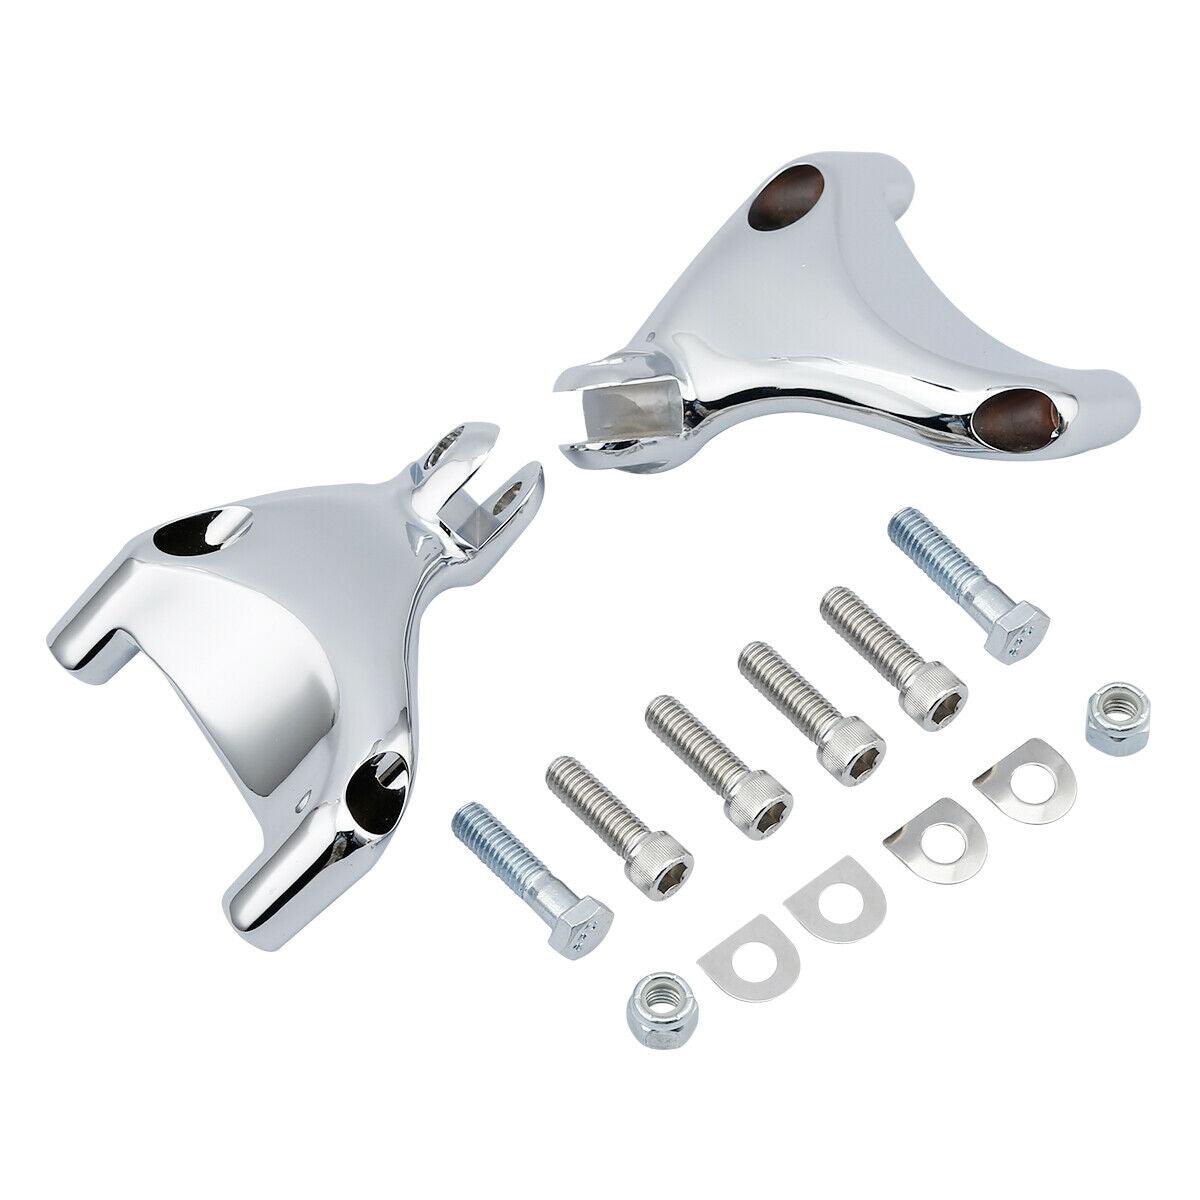 Passenger Rear Foot Pegs Mount Fit For Harley XL 883 1200 Sportster 2004-2013 - Moto Life Products